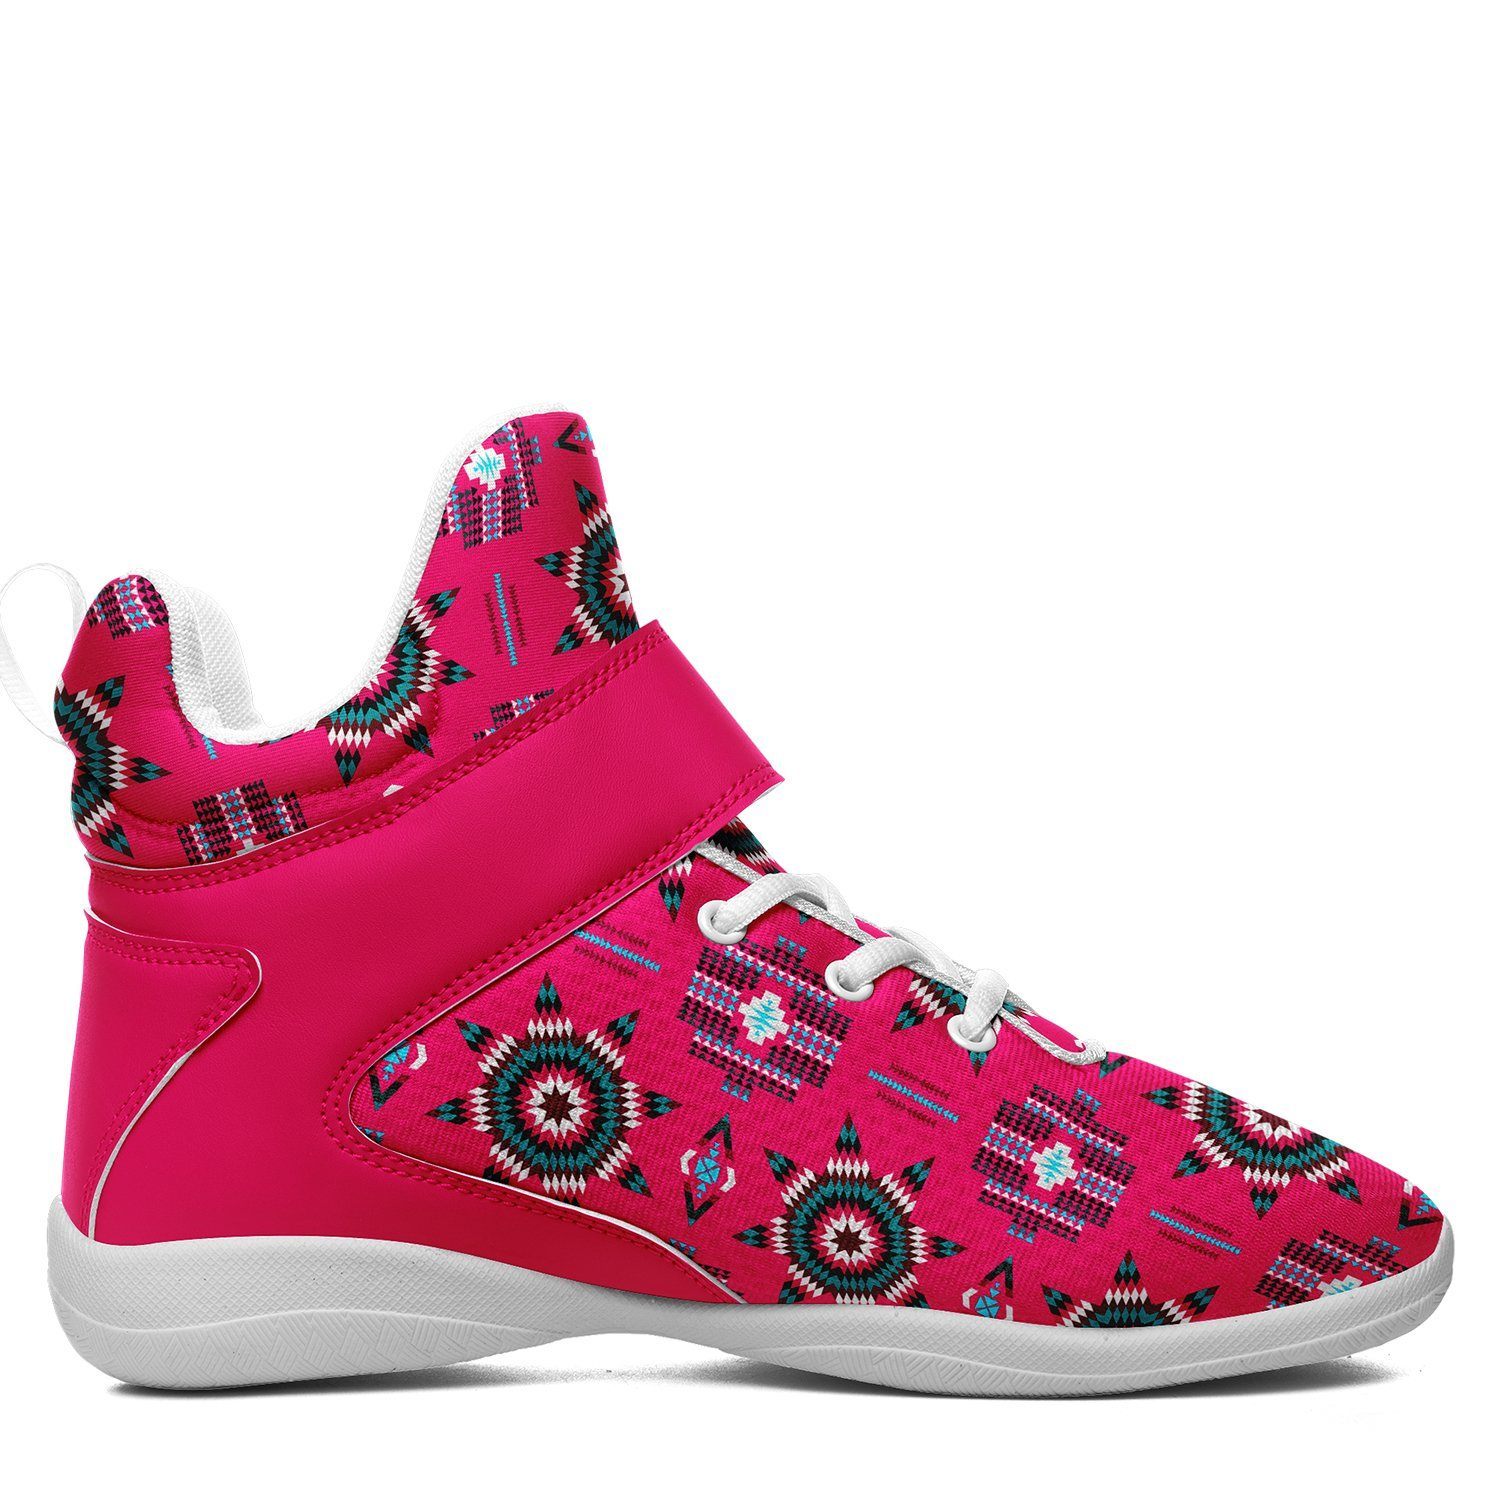 Rising Star Strawberry Moon Ipottaa Basketball / Sport High Top Shoes - White Sole 49 Dzine 